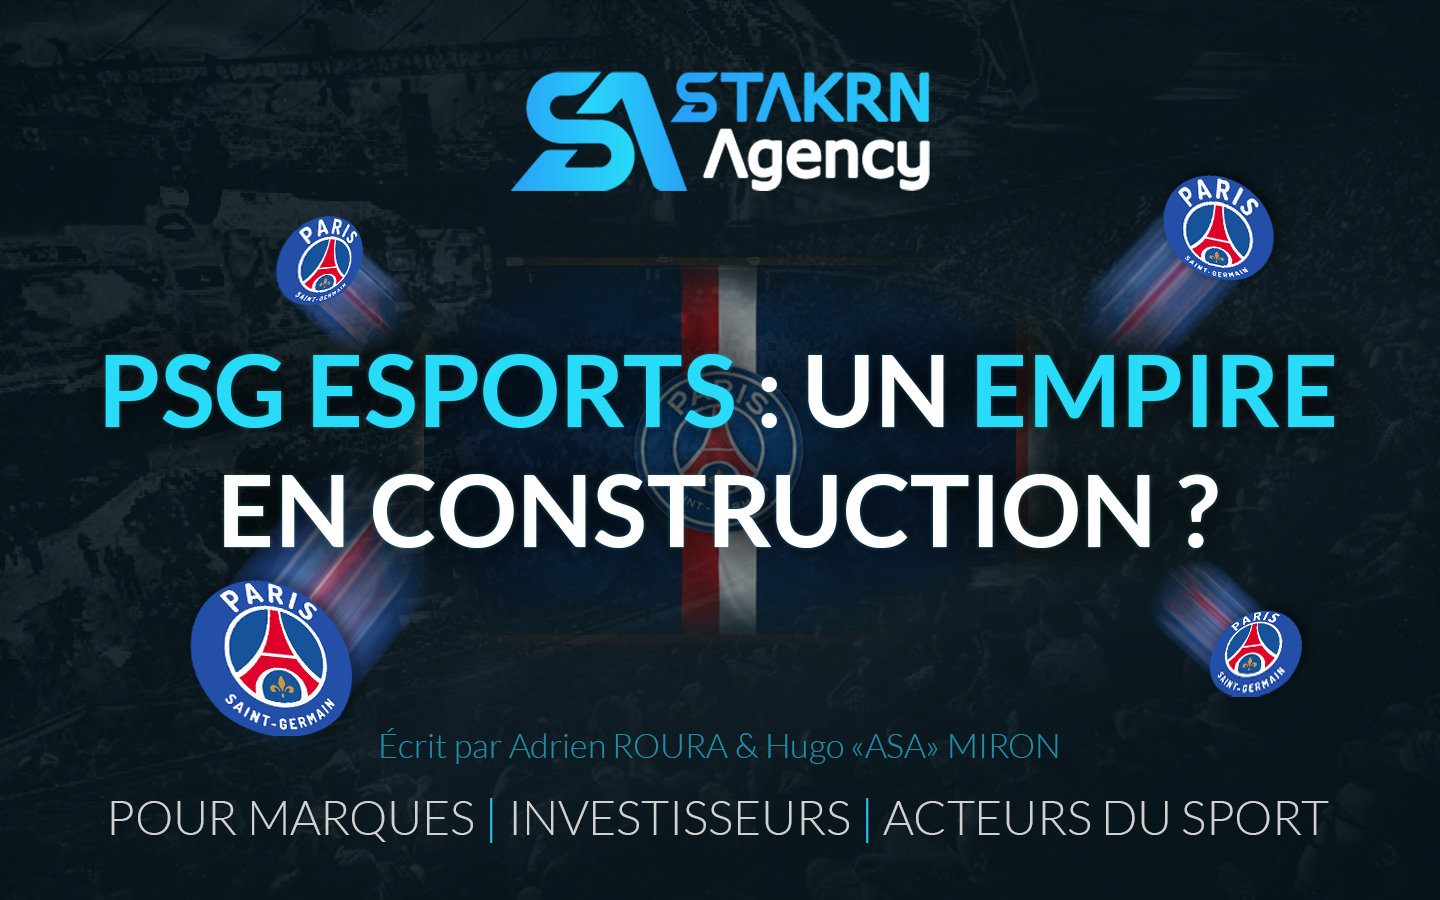 Article psg esports stakrn agency